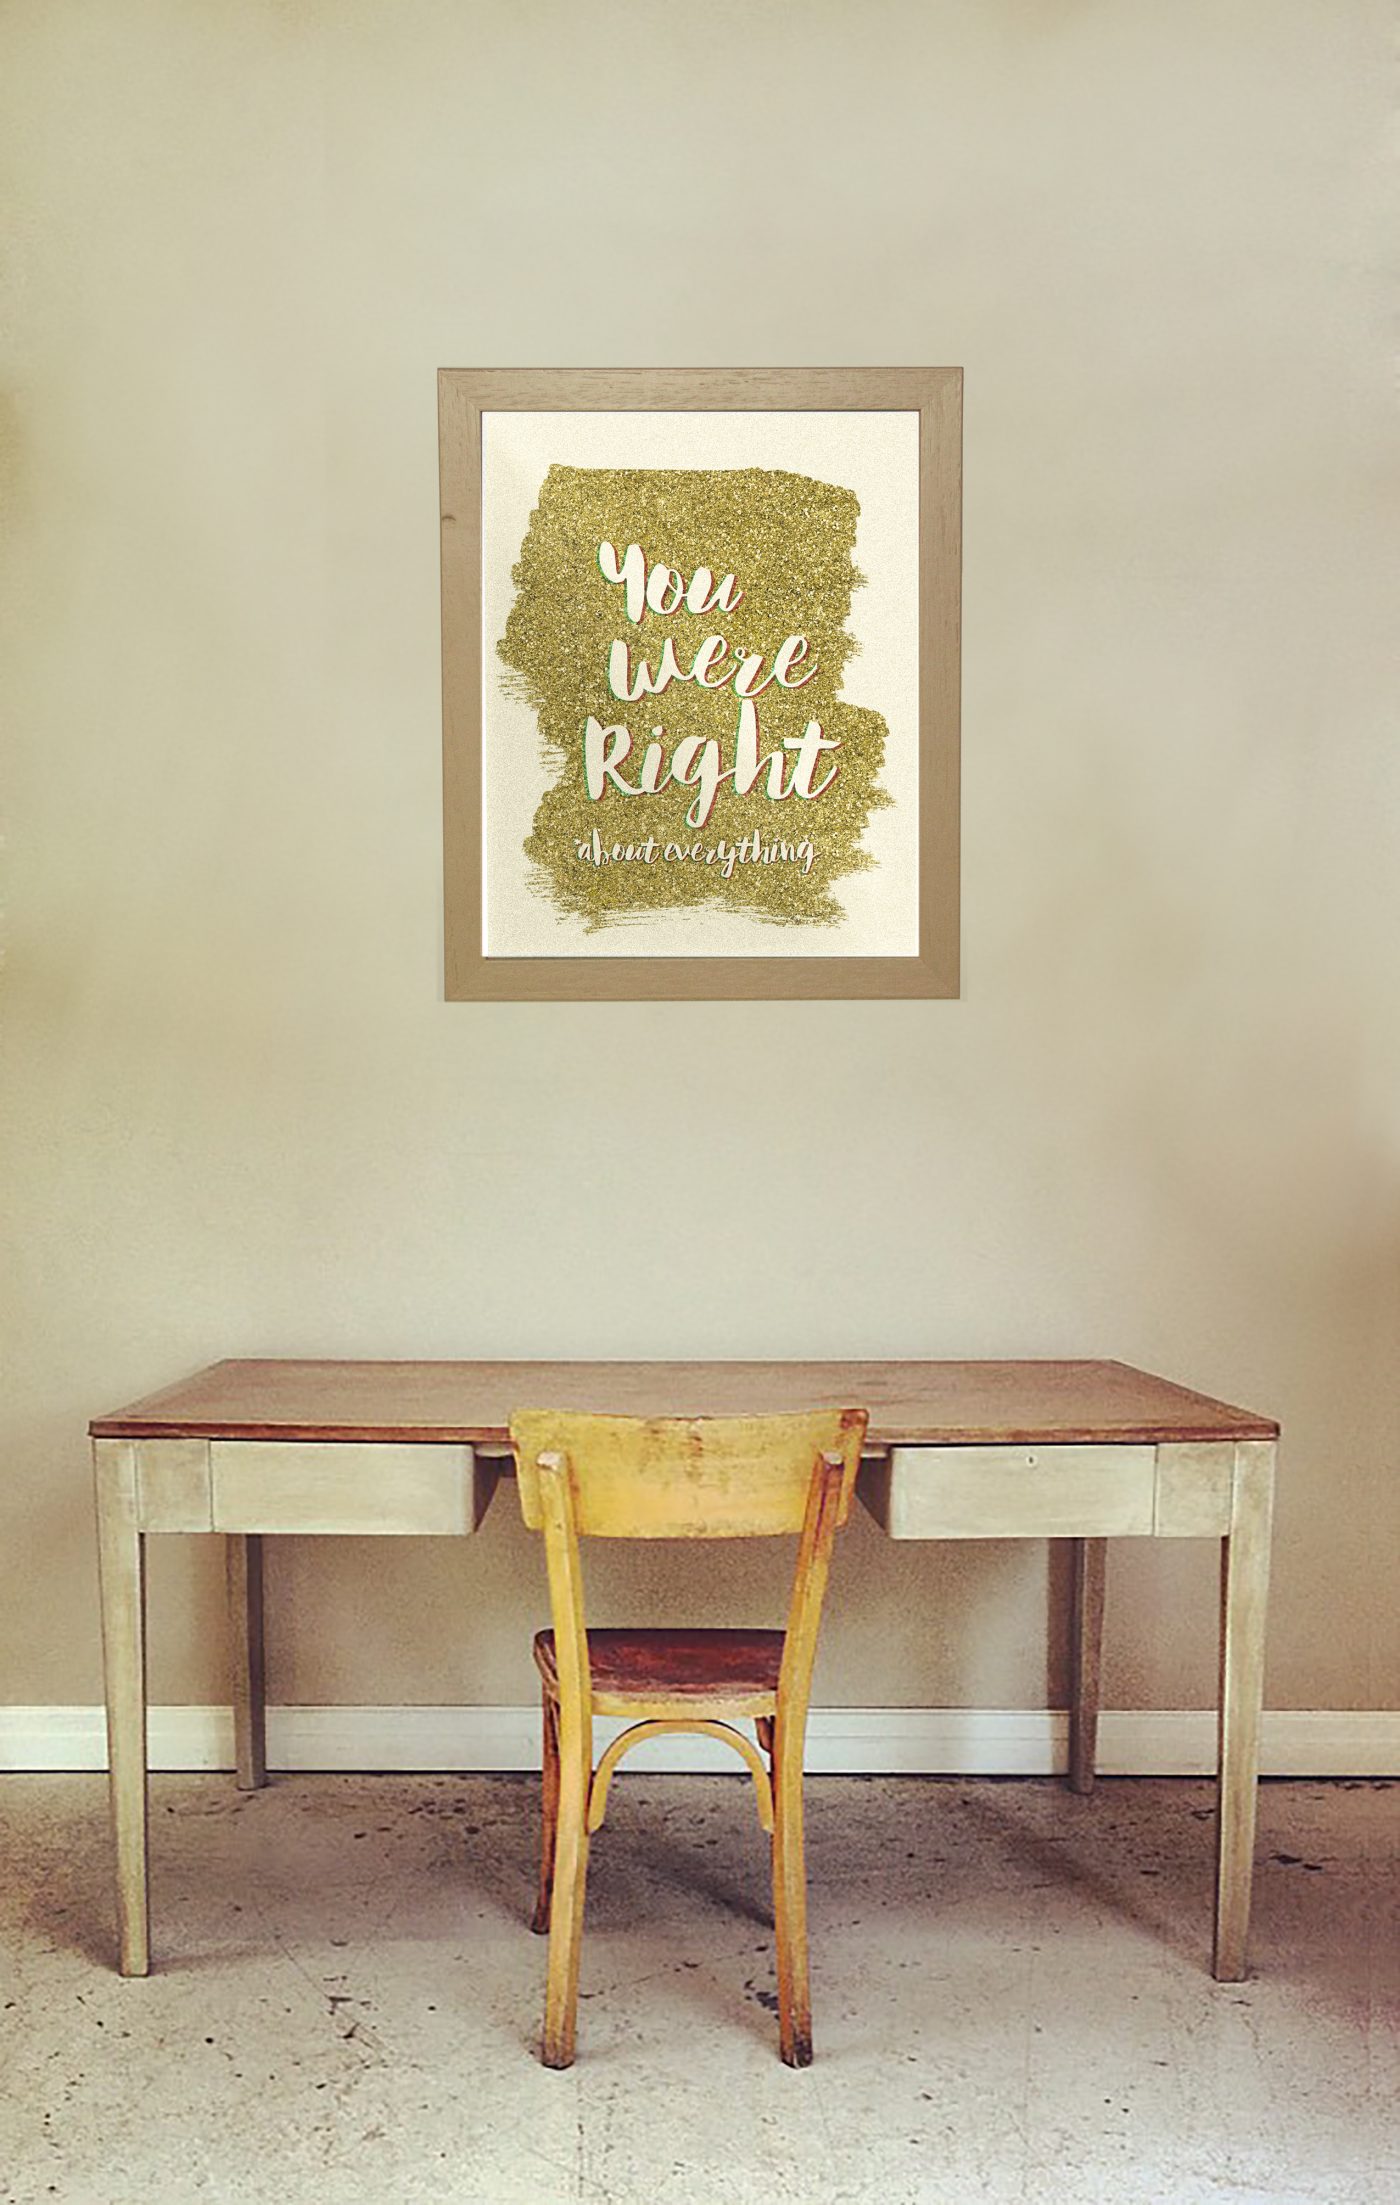 Free Art Printable: You Were Right (About Everything) • Little Gold Pixel